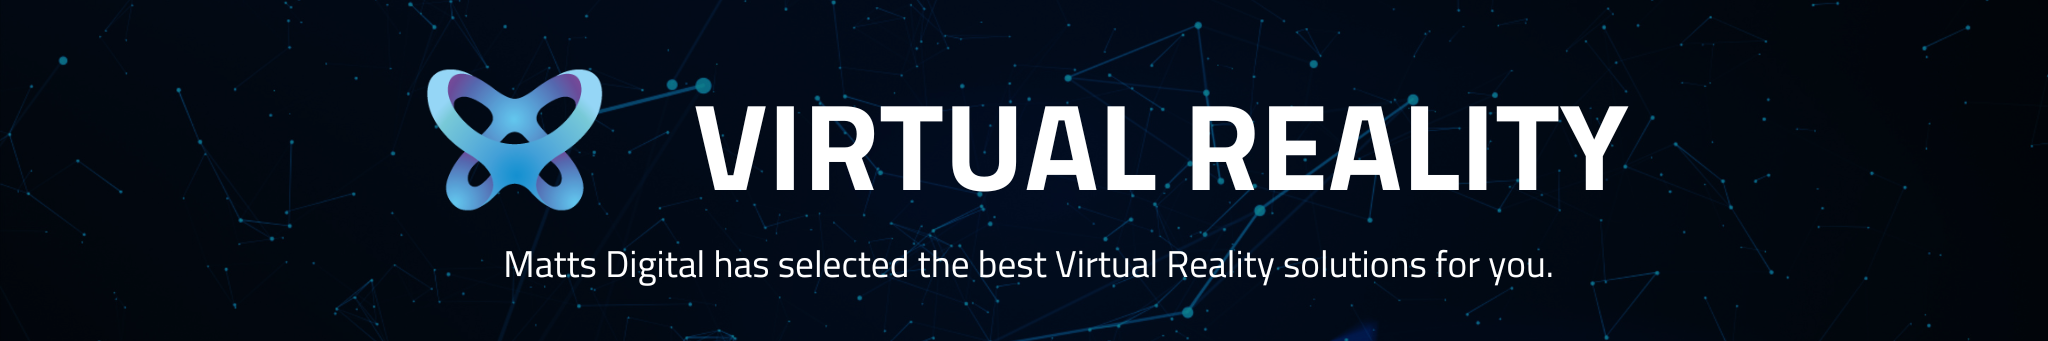 Text 'Virtual Reality' in blue on black background